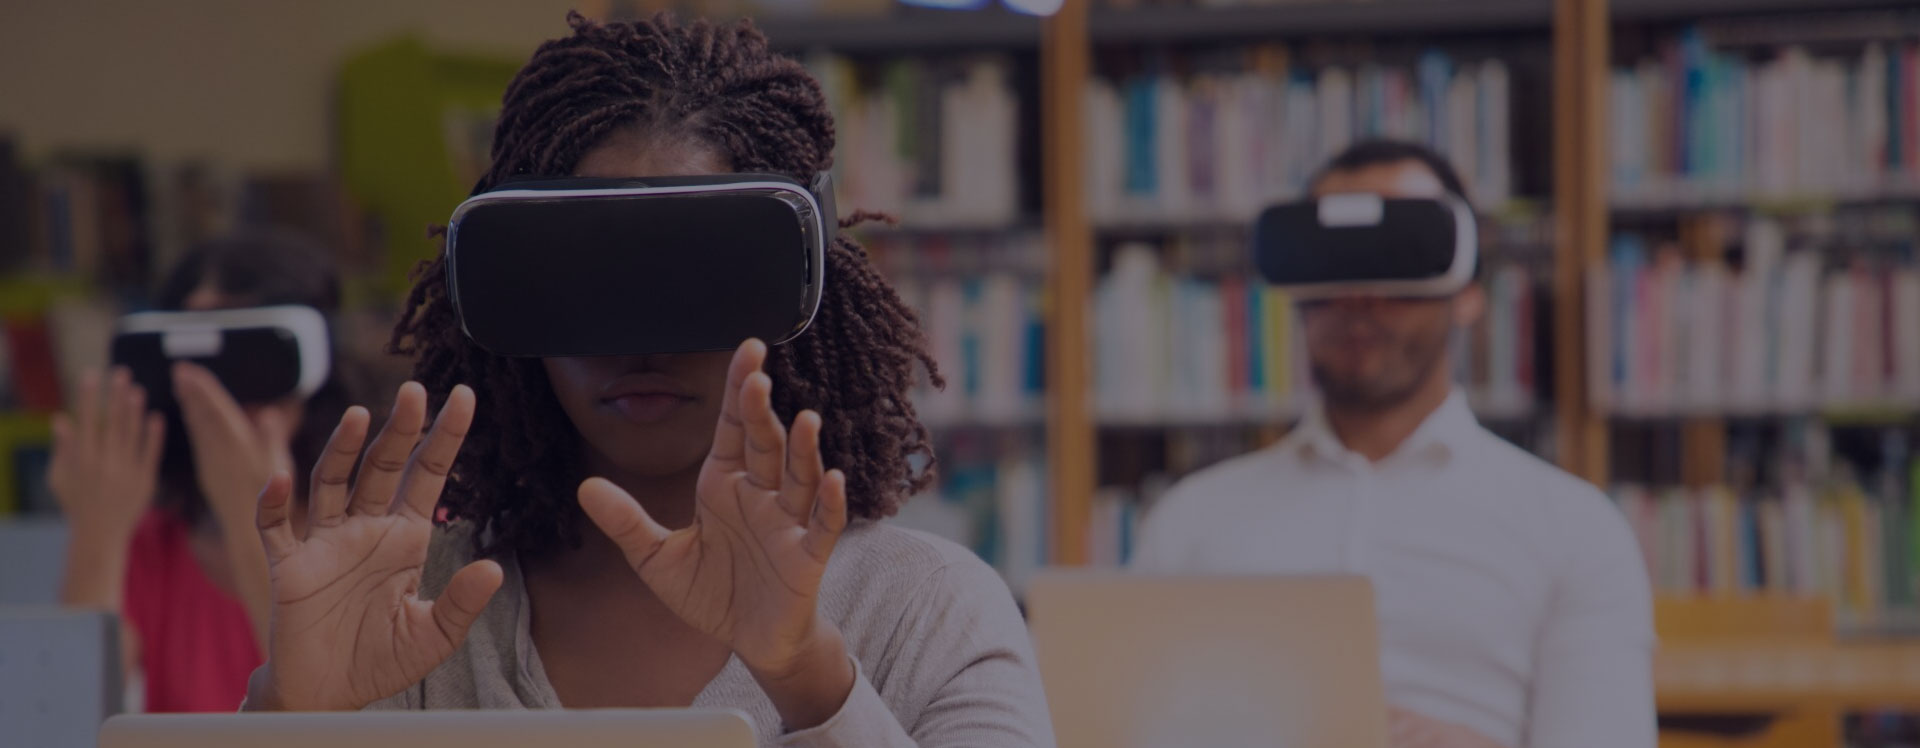 How Virtual Reality will change education